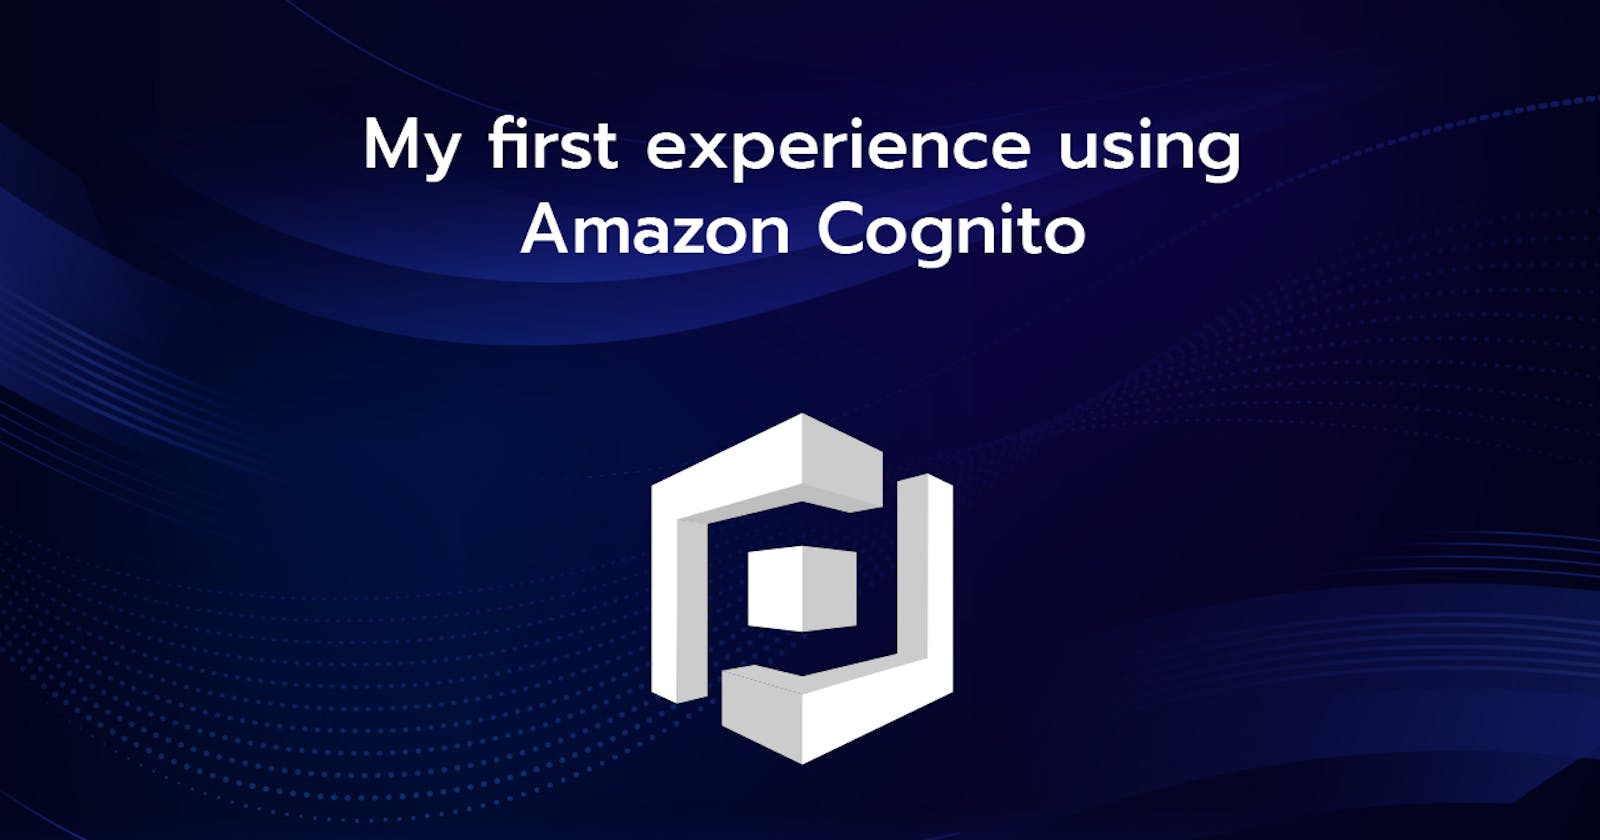 My first experience using Amazon Cognito